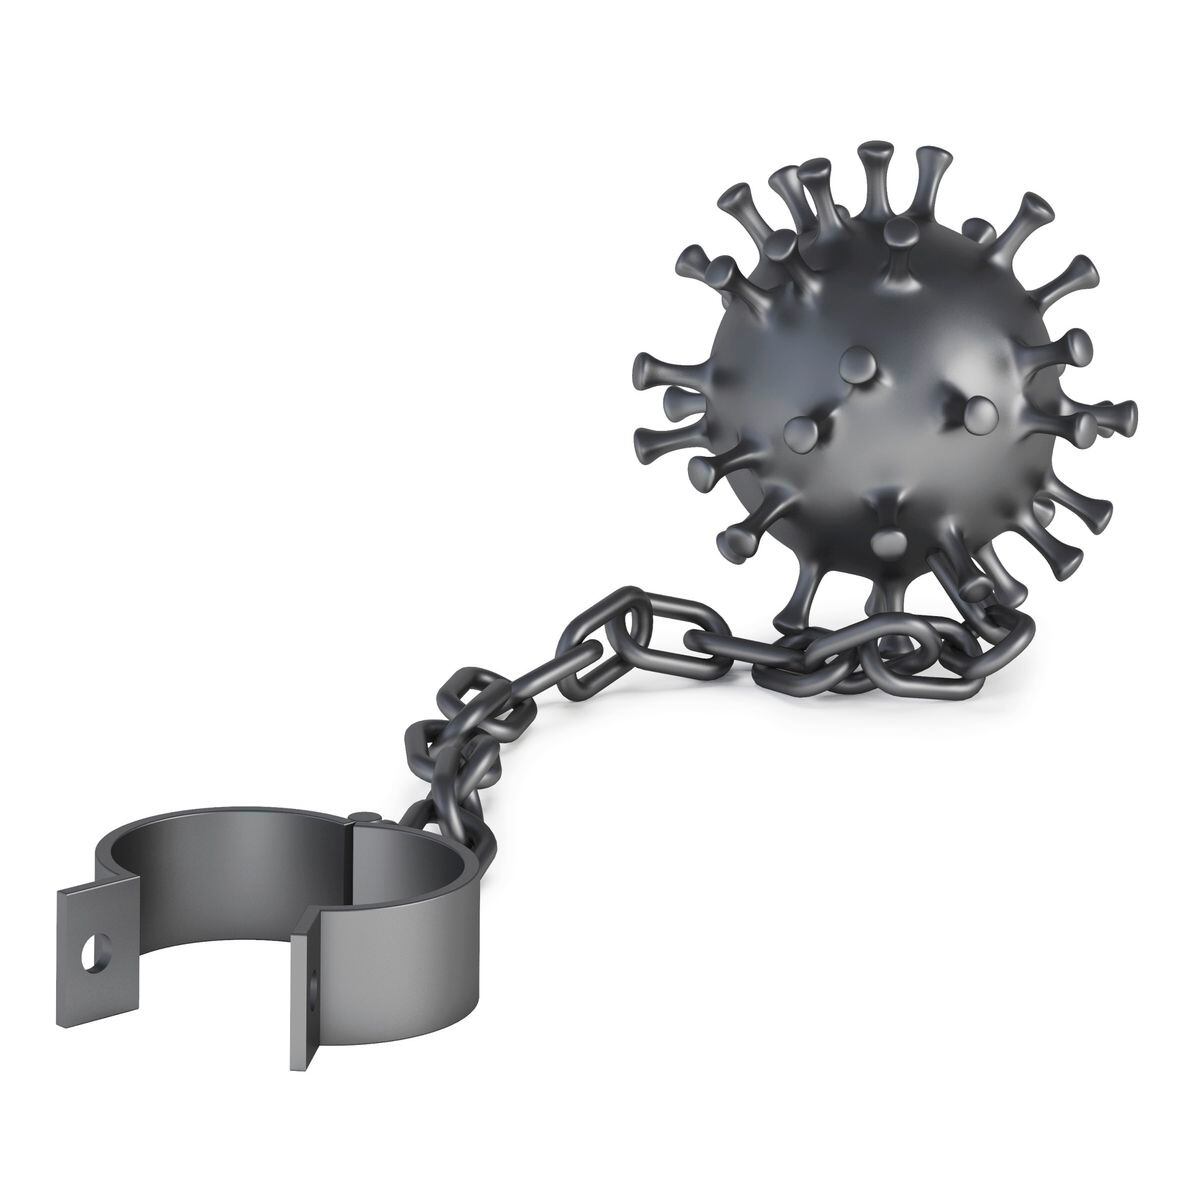 Coronavirus shackles on white background. COVID-19. Clipping path included. 3D rendering. (30421911)